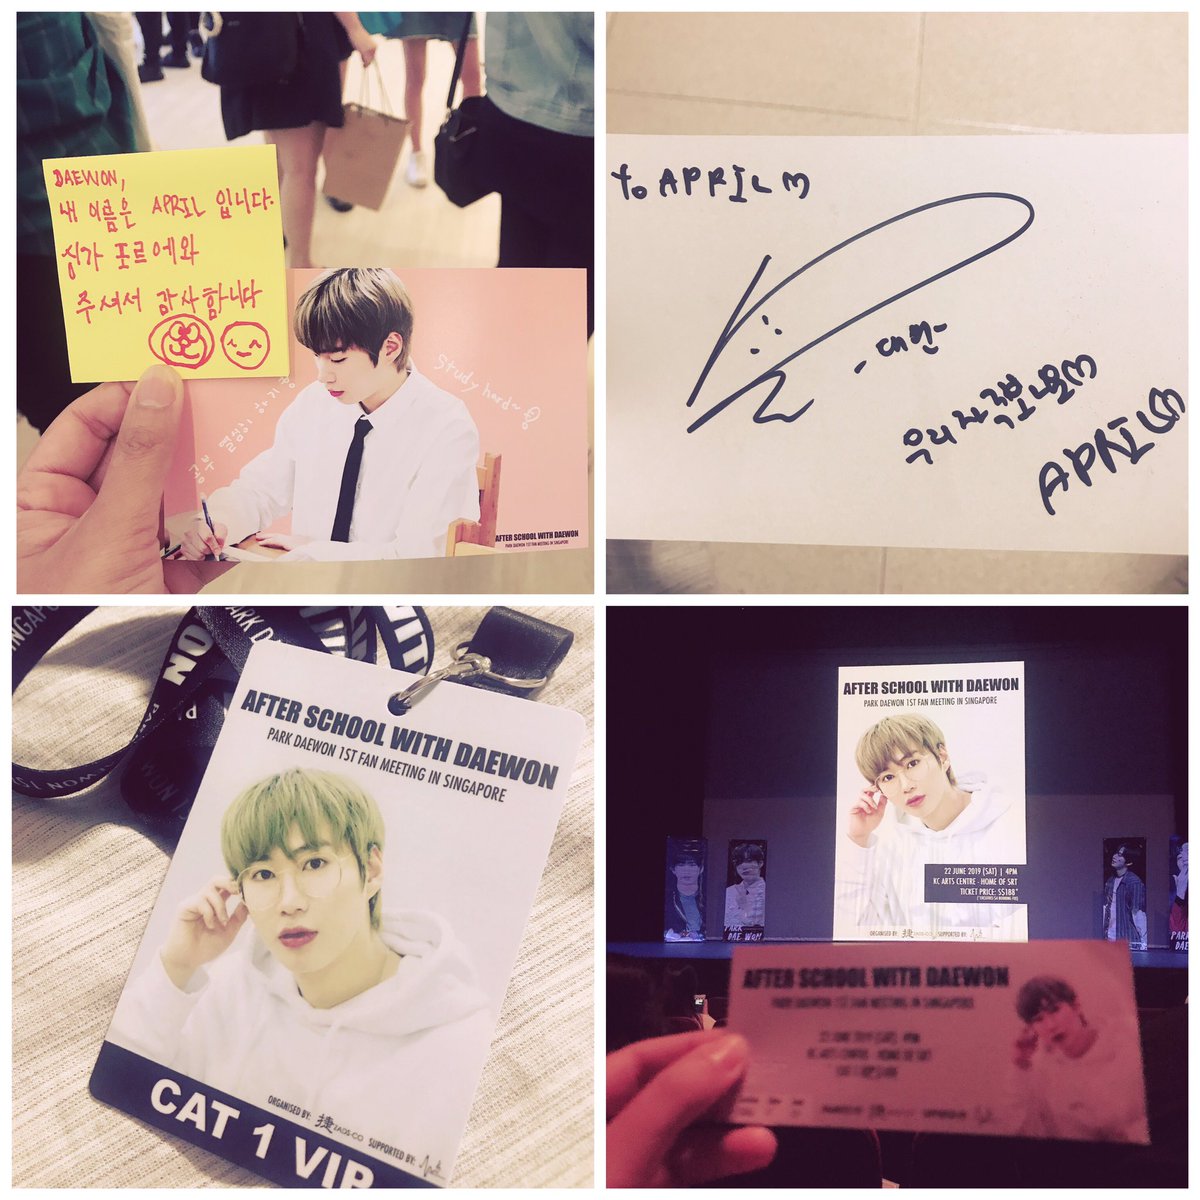 2019.06.22
Another memory saved📝
Daewon’s 1st Fan Meeting 
Thank you for bringing Daewon to SG @ZADSCO 🙆🏼‍♀️
So happy to meet him again😃
I’m so glad to meet you again too @Gcz_Julianti 
#PARKDAEWONinSG #AfterSchoolWithDaewon #박대원 
#unme #kpopfangirl #memories #KCArtsCentre